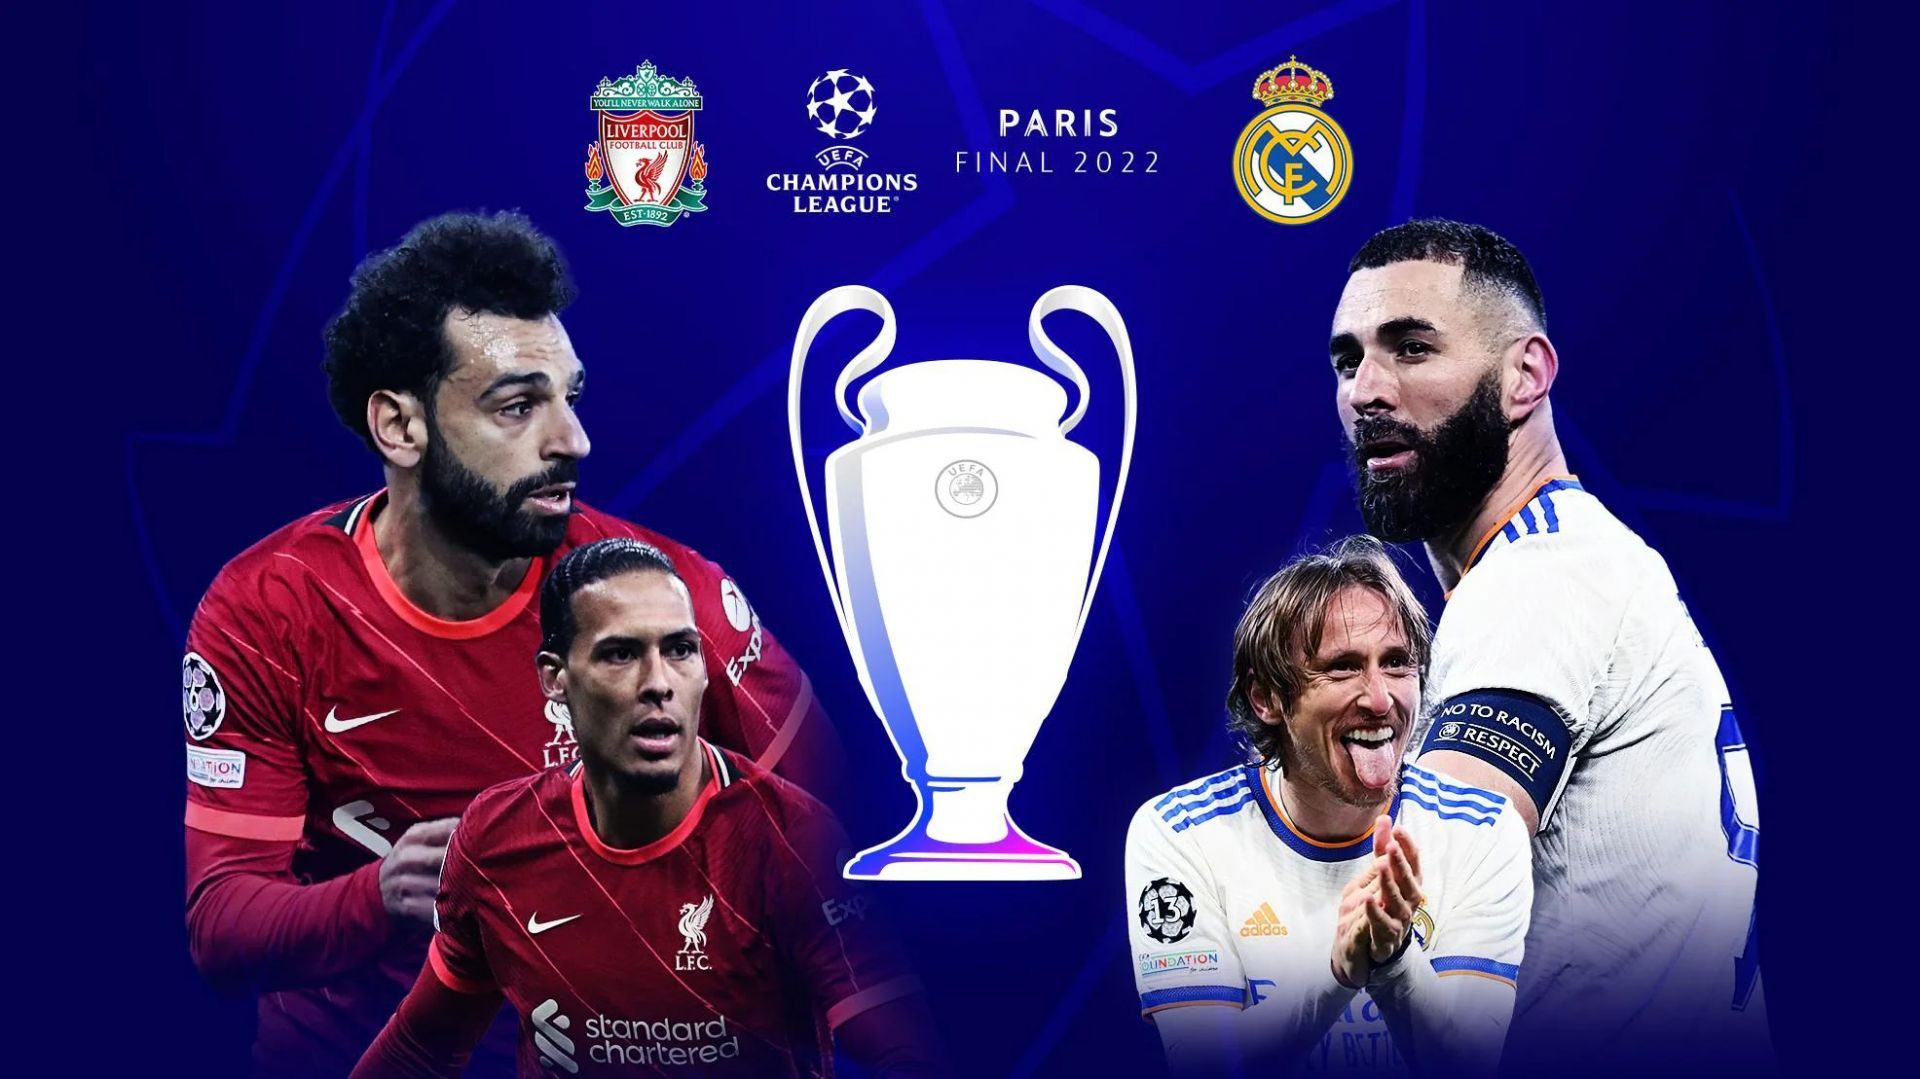 Two heavyweights of European football would collide for Champions League glory on Saturday